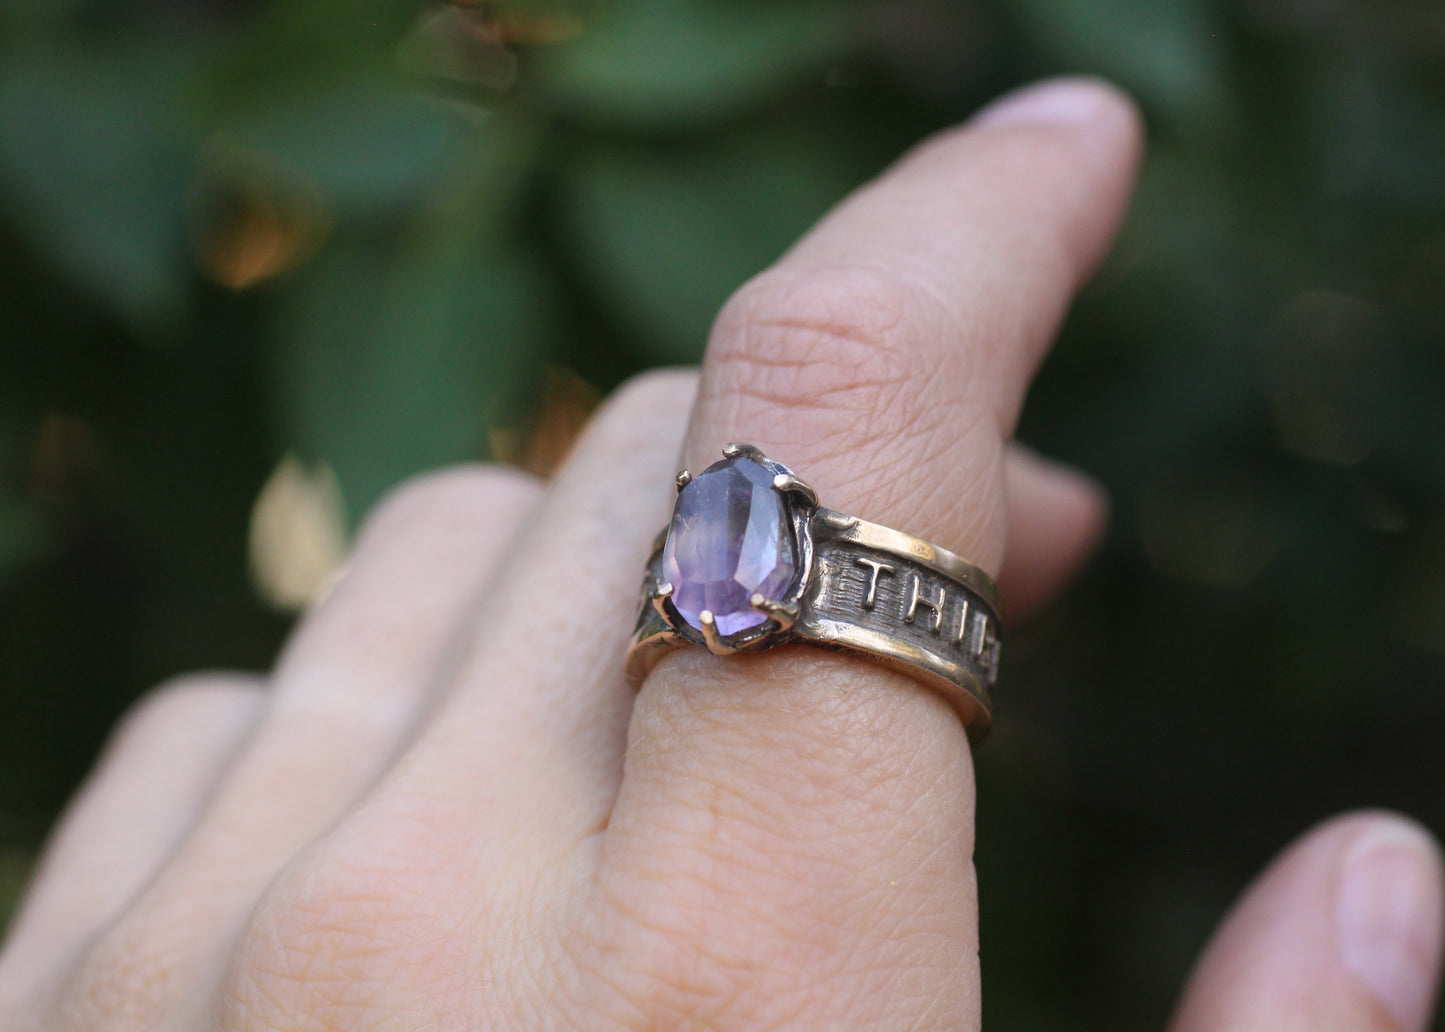 Amethyst Third Eye Co. text ring band - Size 9.5